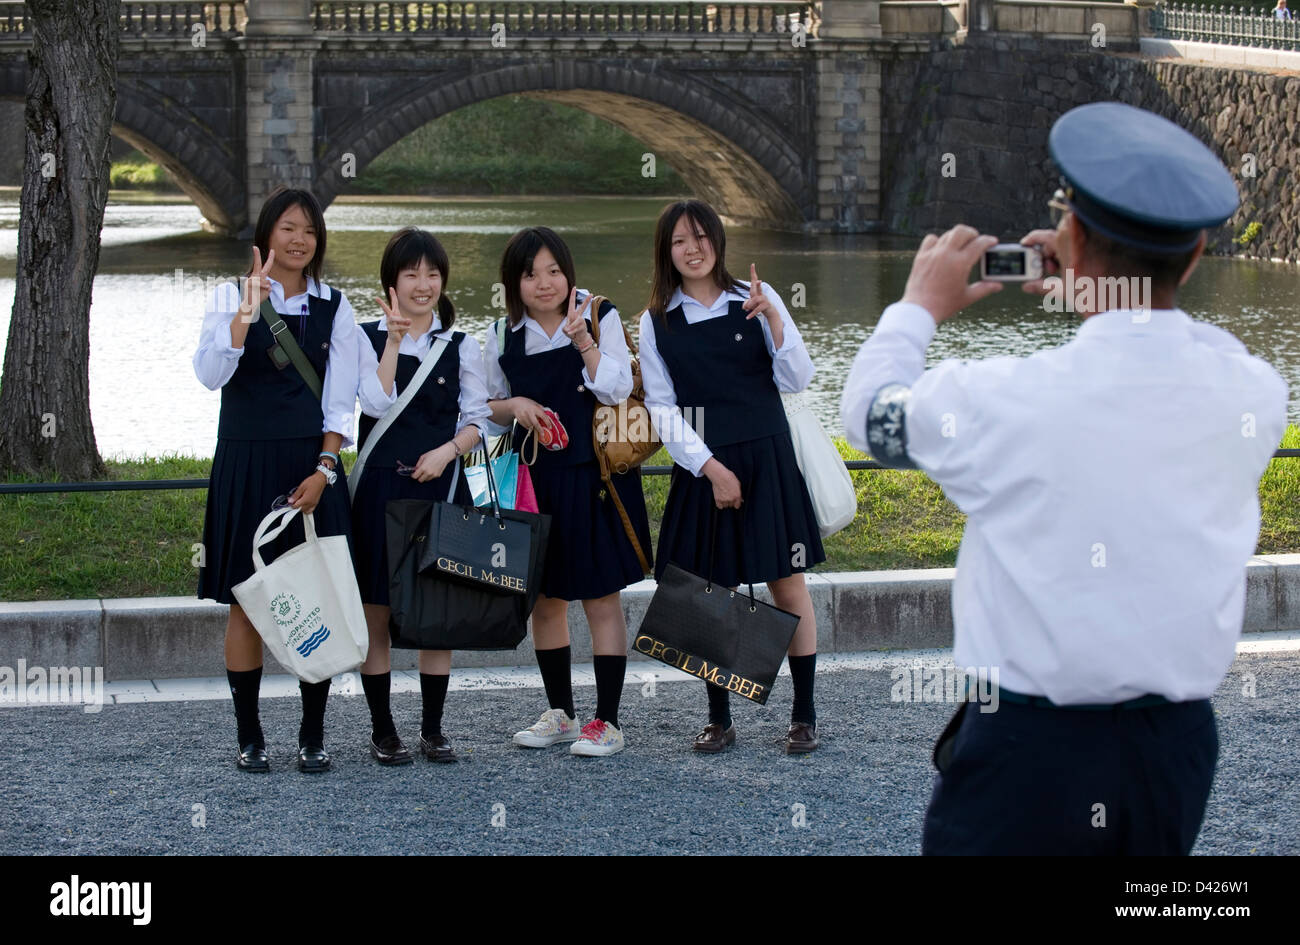 Security guard taking commemorative photo of high school girls at Tokyo's famous Imperial Palace Nijubashi Bridge. Stock Photo